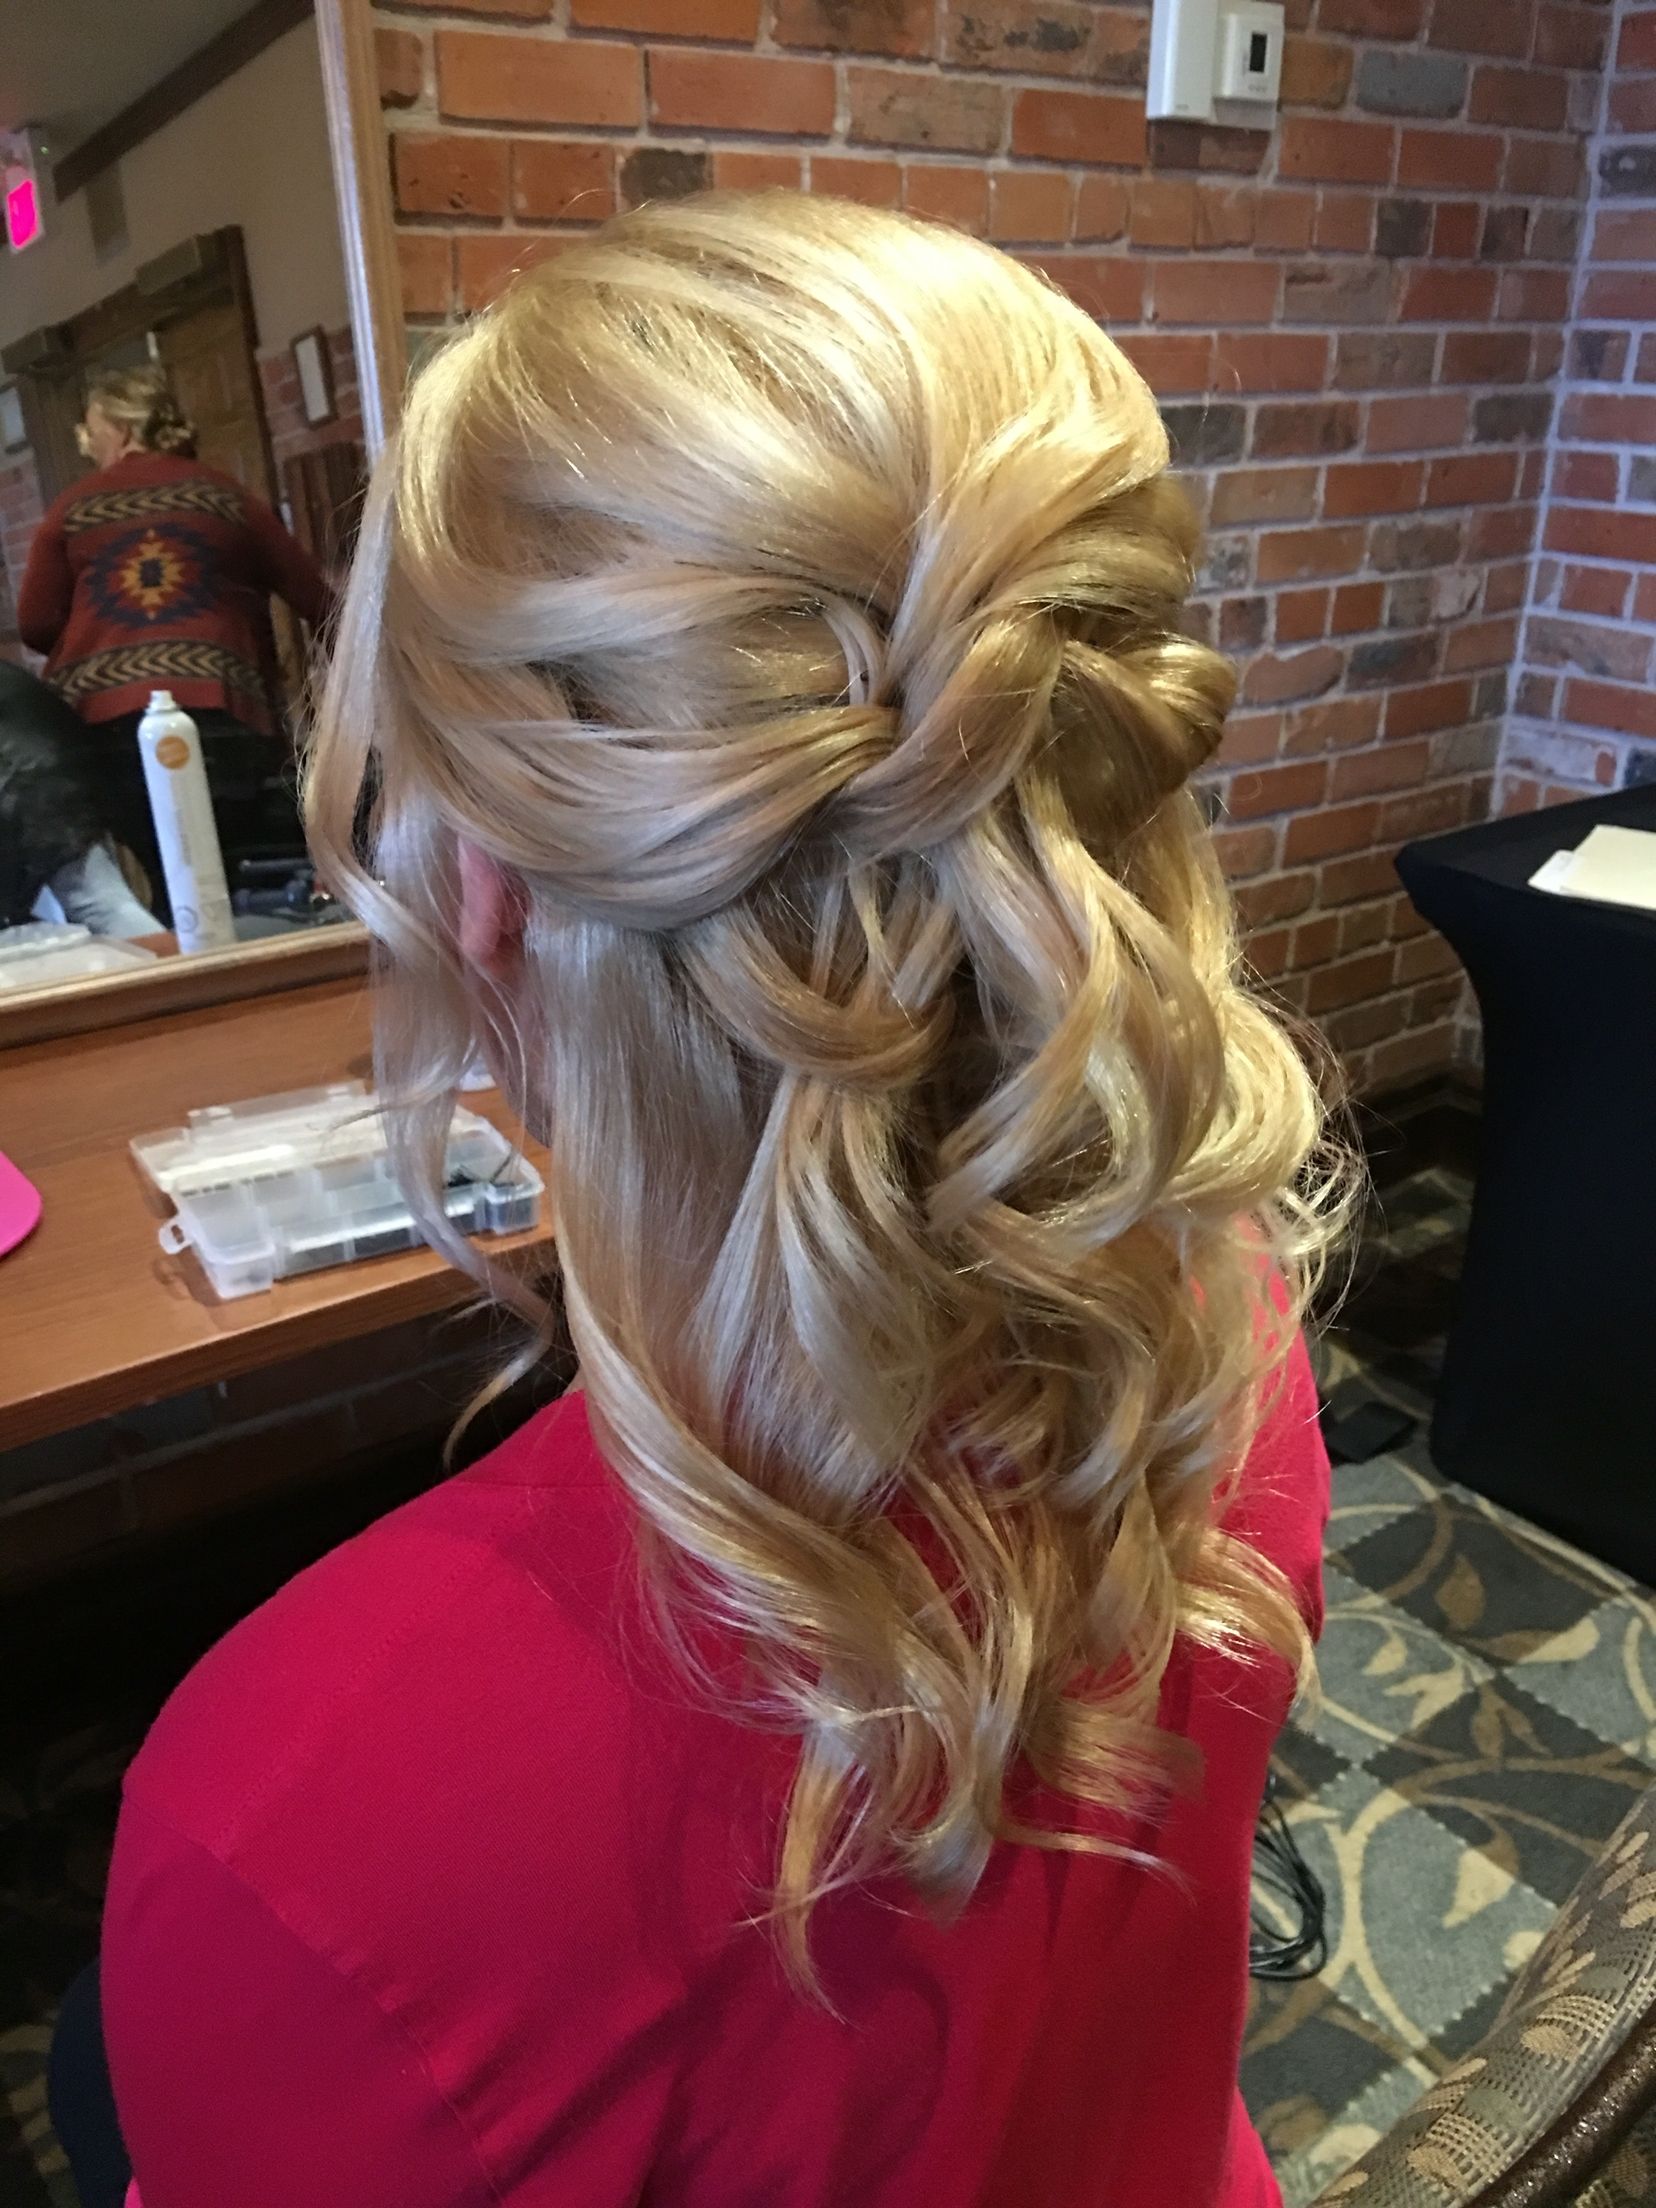 Loved This Half Up Half Down Look For The Mother Of The Bride In Half Updos For Mother Of The Bride (View 9 of 15)